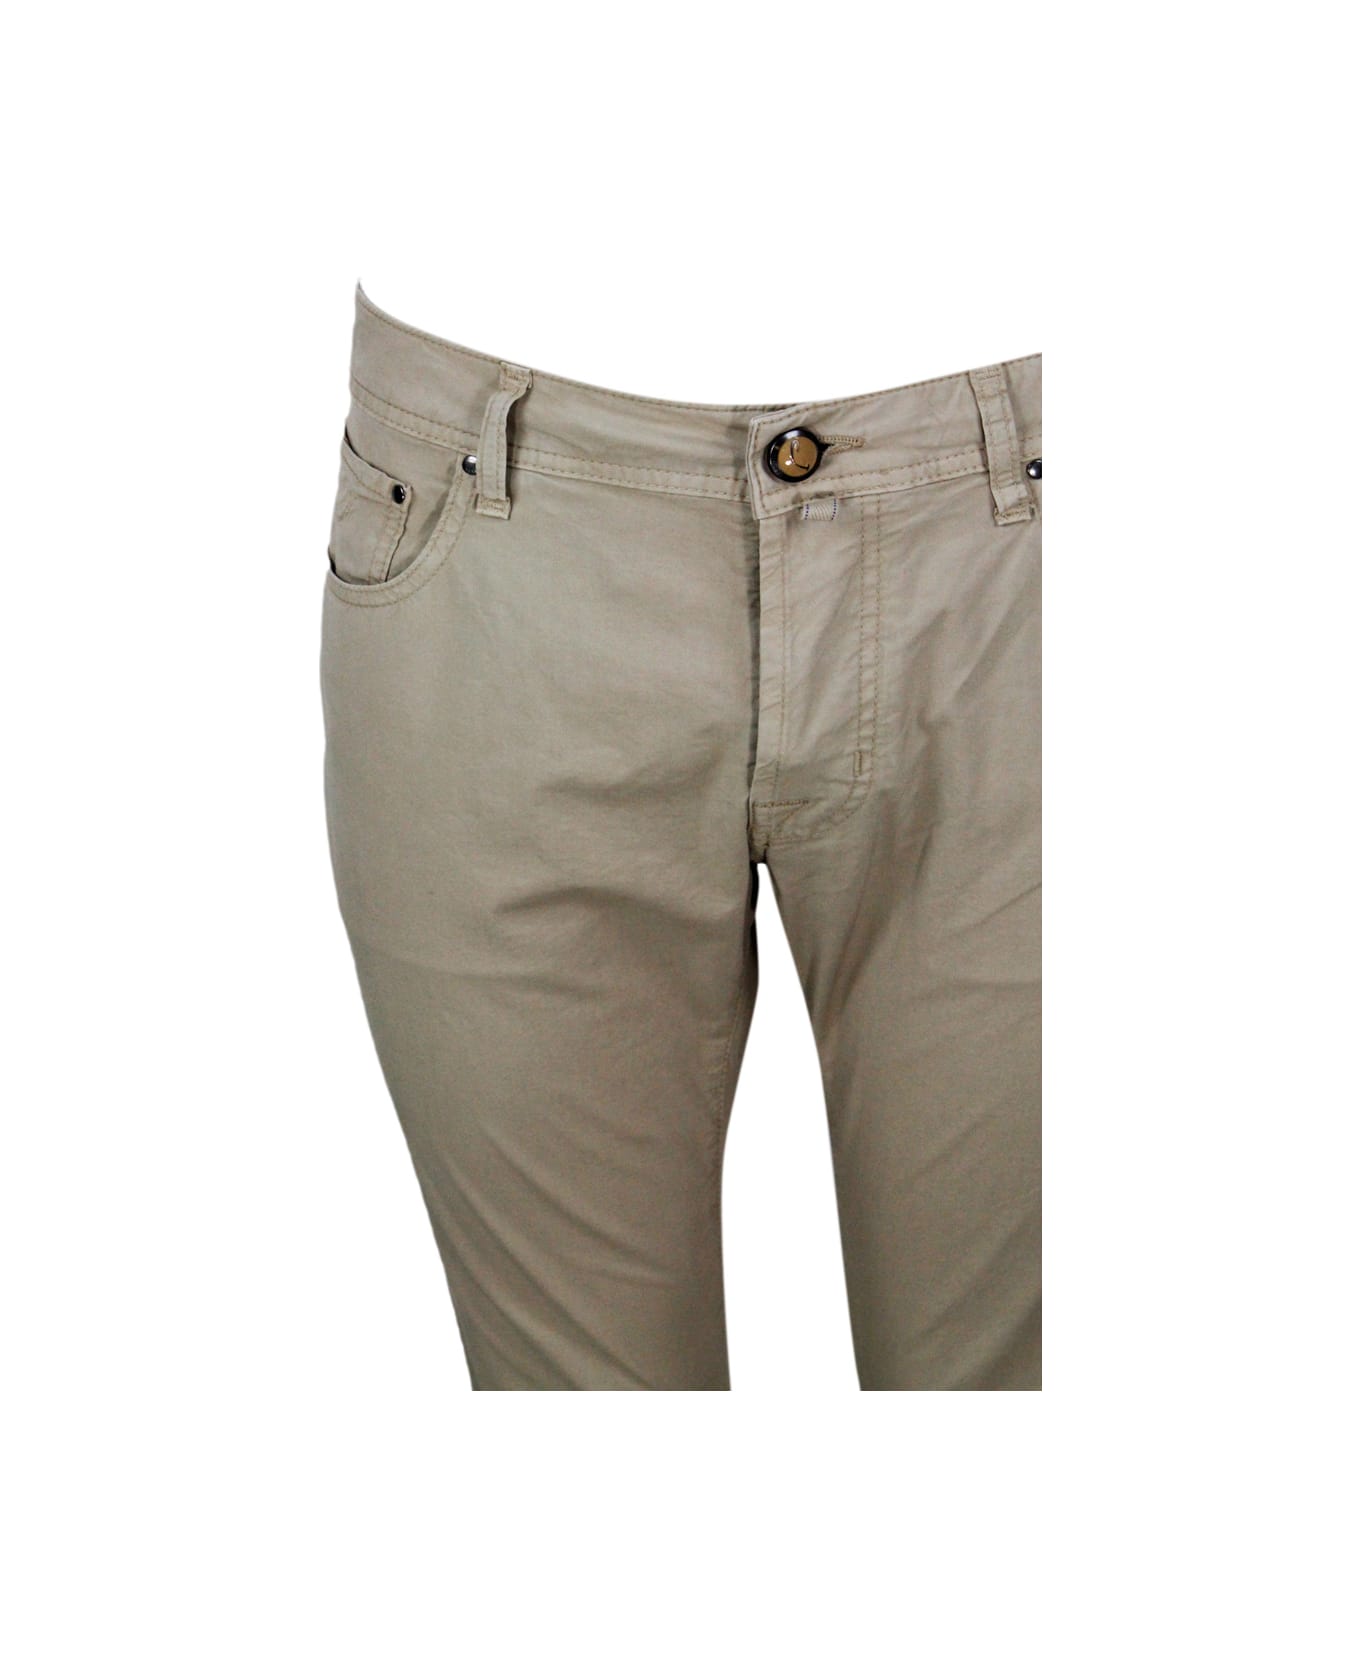 Jacob Cohen Bard J688 Luxury Edition Trousers In Soft Stretch Cotton With 5 Pockets With Closure Buttons And Lacquered Button And Pony Skin Tag With Logo - Beige ボトムス